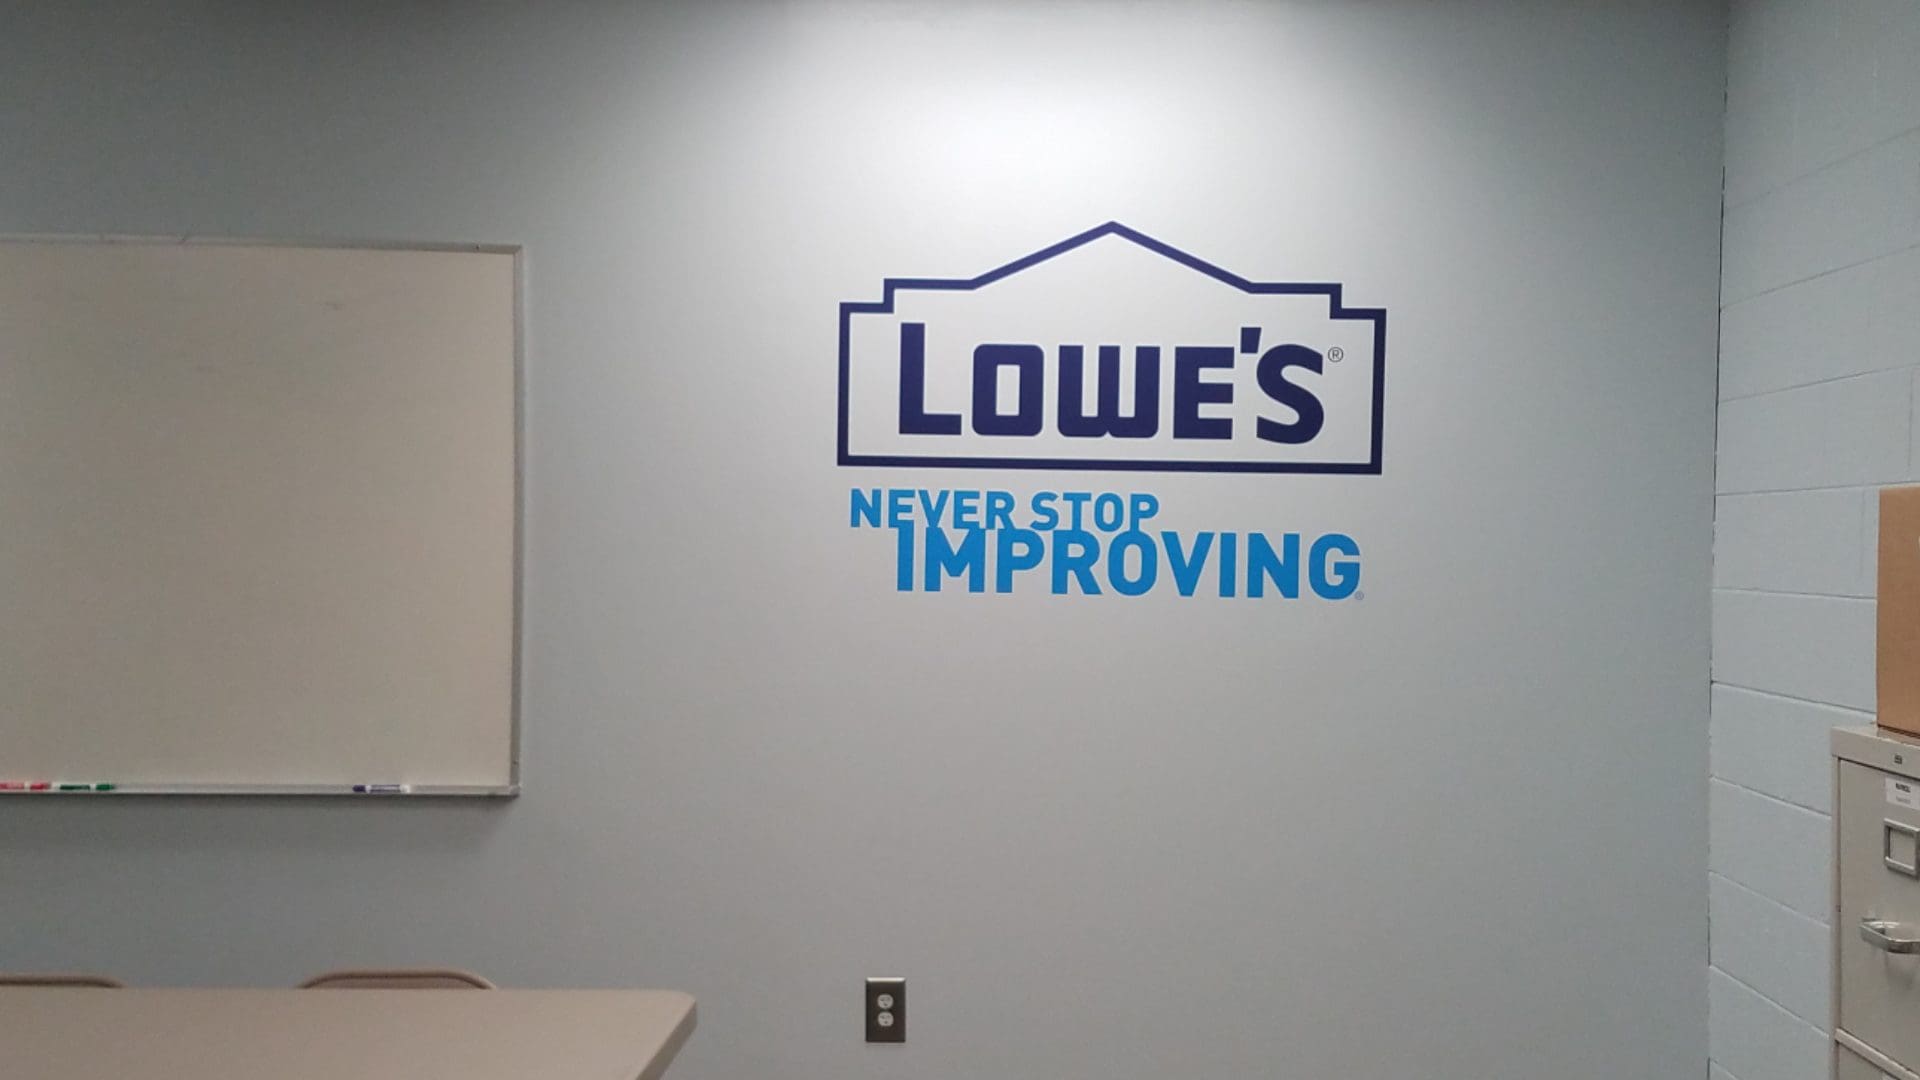 Lowes - Vinyl Wall Graphics (4)